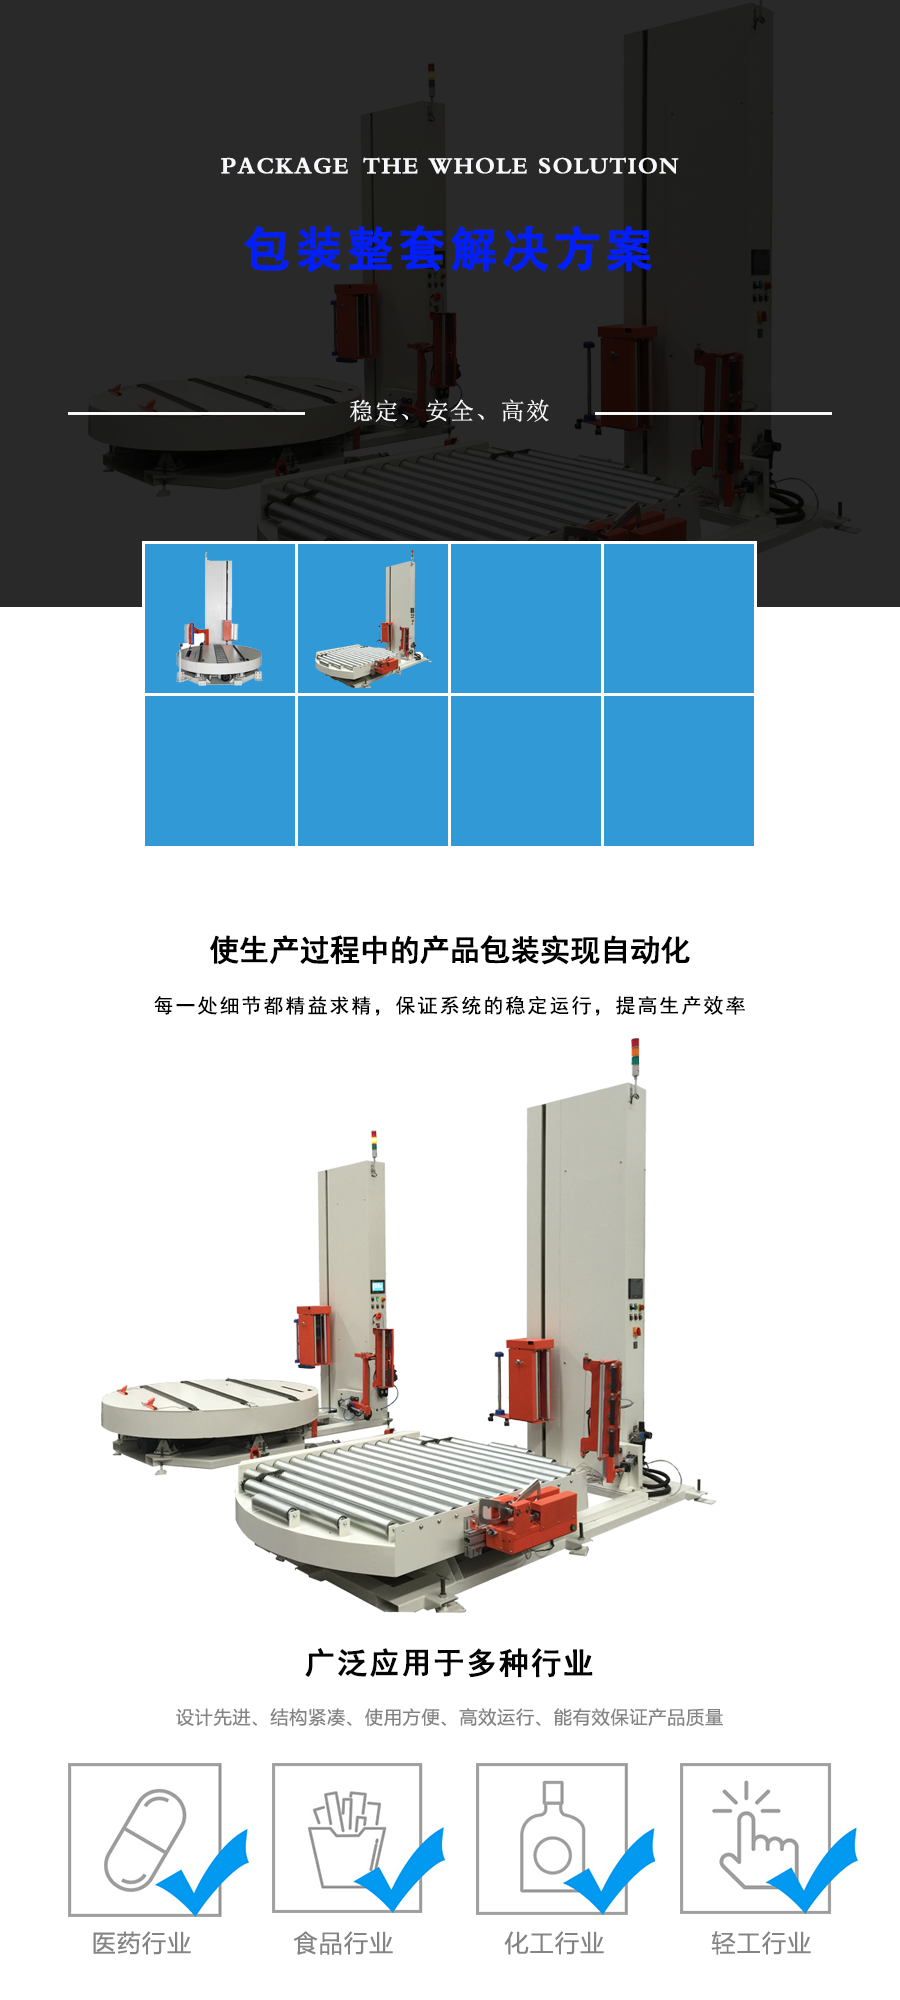 MP303 fully auto conveyorized pallet wrapper(图1)